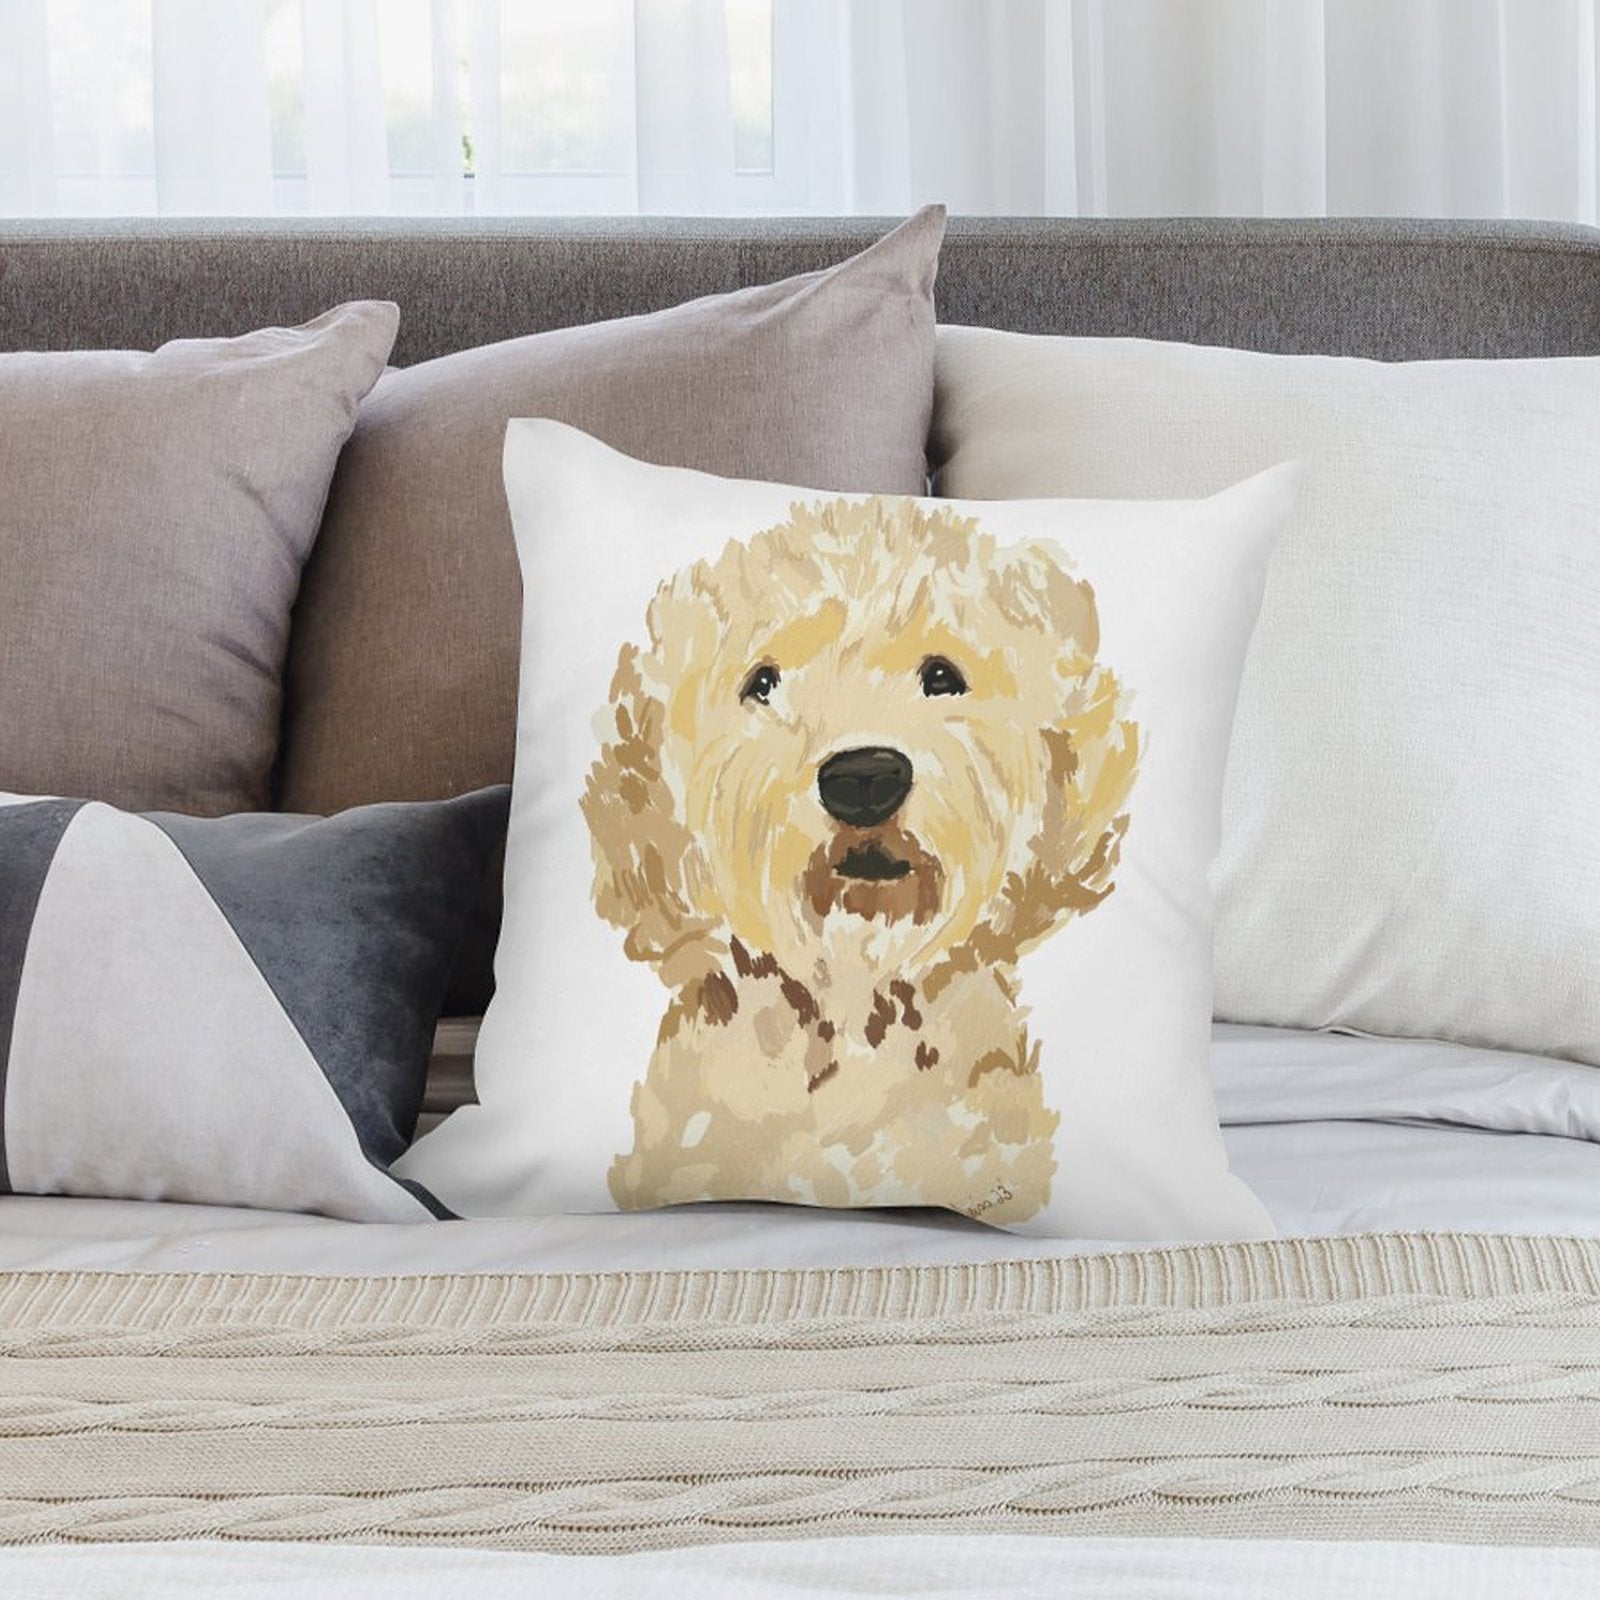 GoldenDoodle Picture on Plush Pillow Case (Pillow Excluded, Set of 2) - Blue Cava